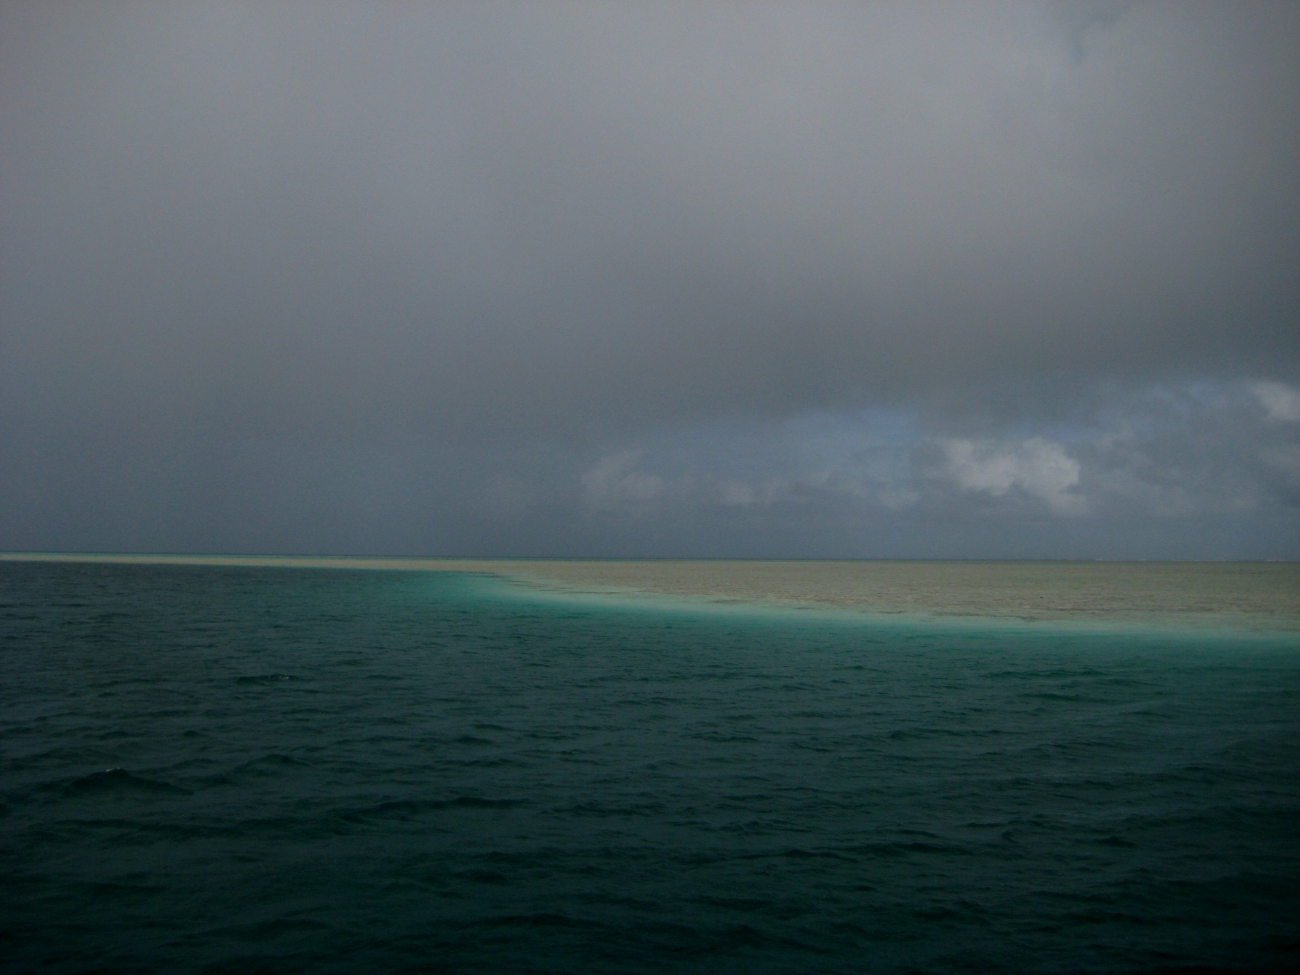 Looking across the reef flat along part of Palmyra Atoll